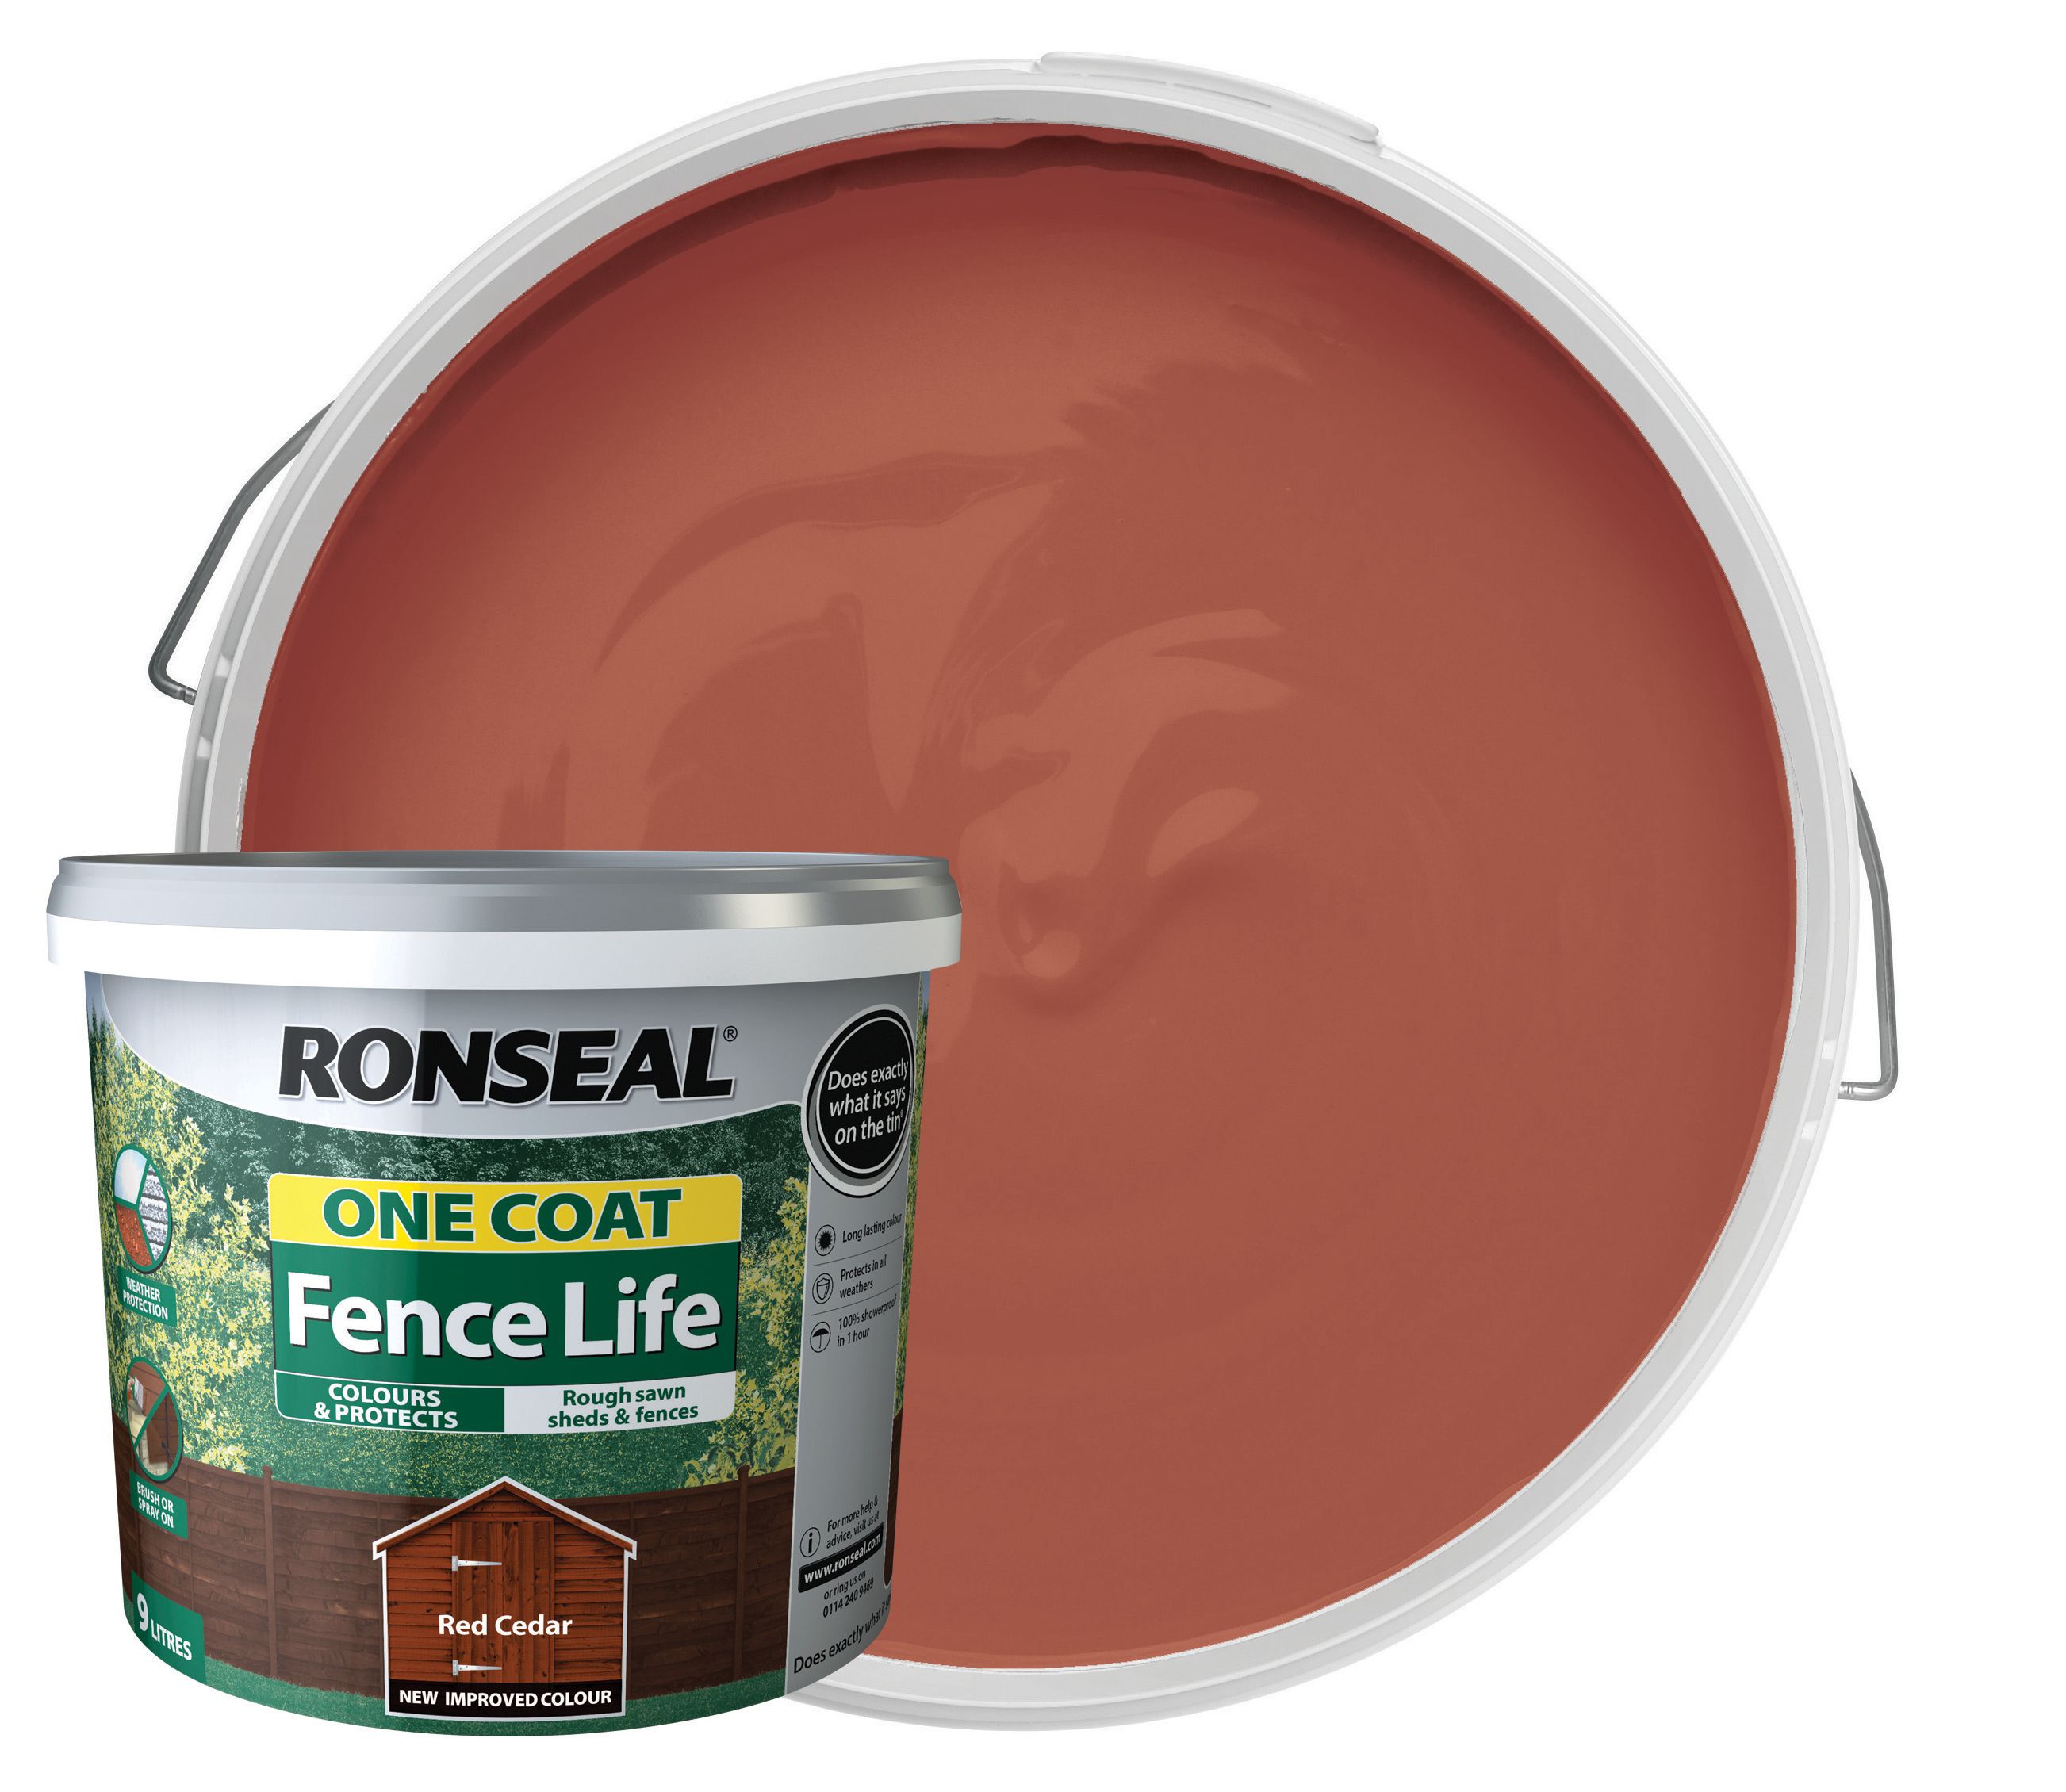 Ronseal One Coat Fence Life Matt Shed & Fence Treatment - Red Cedar 9L